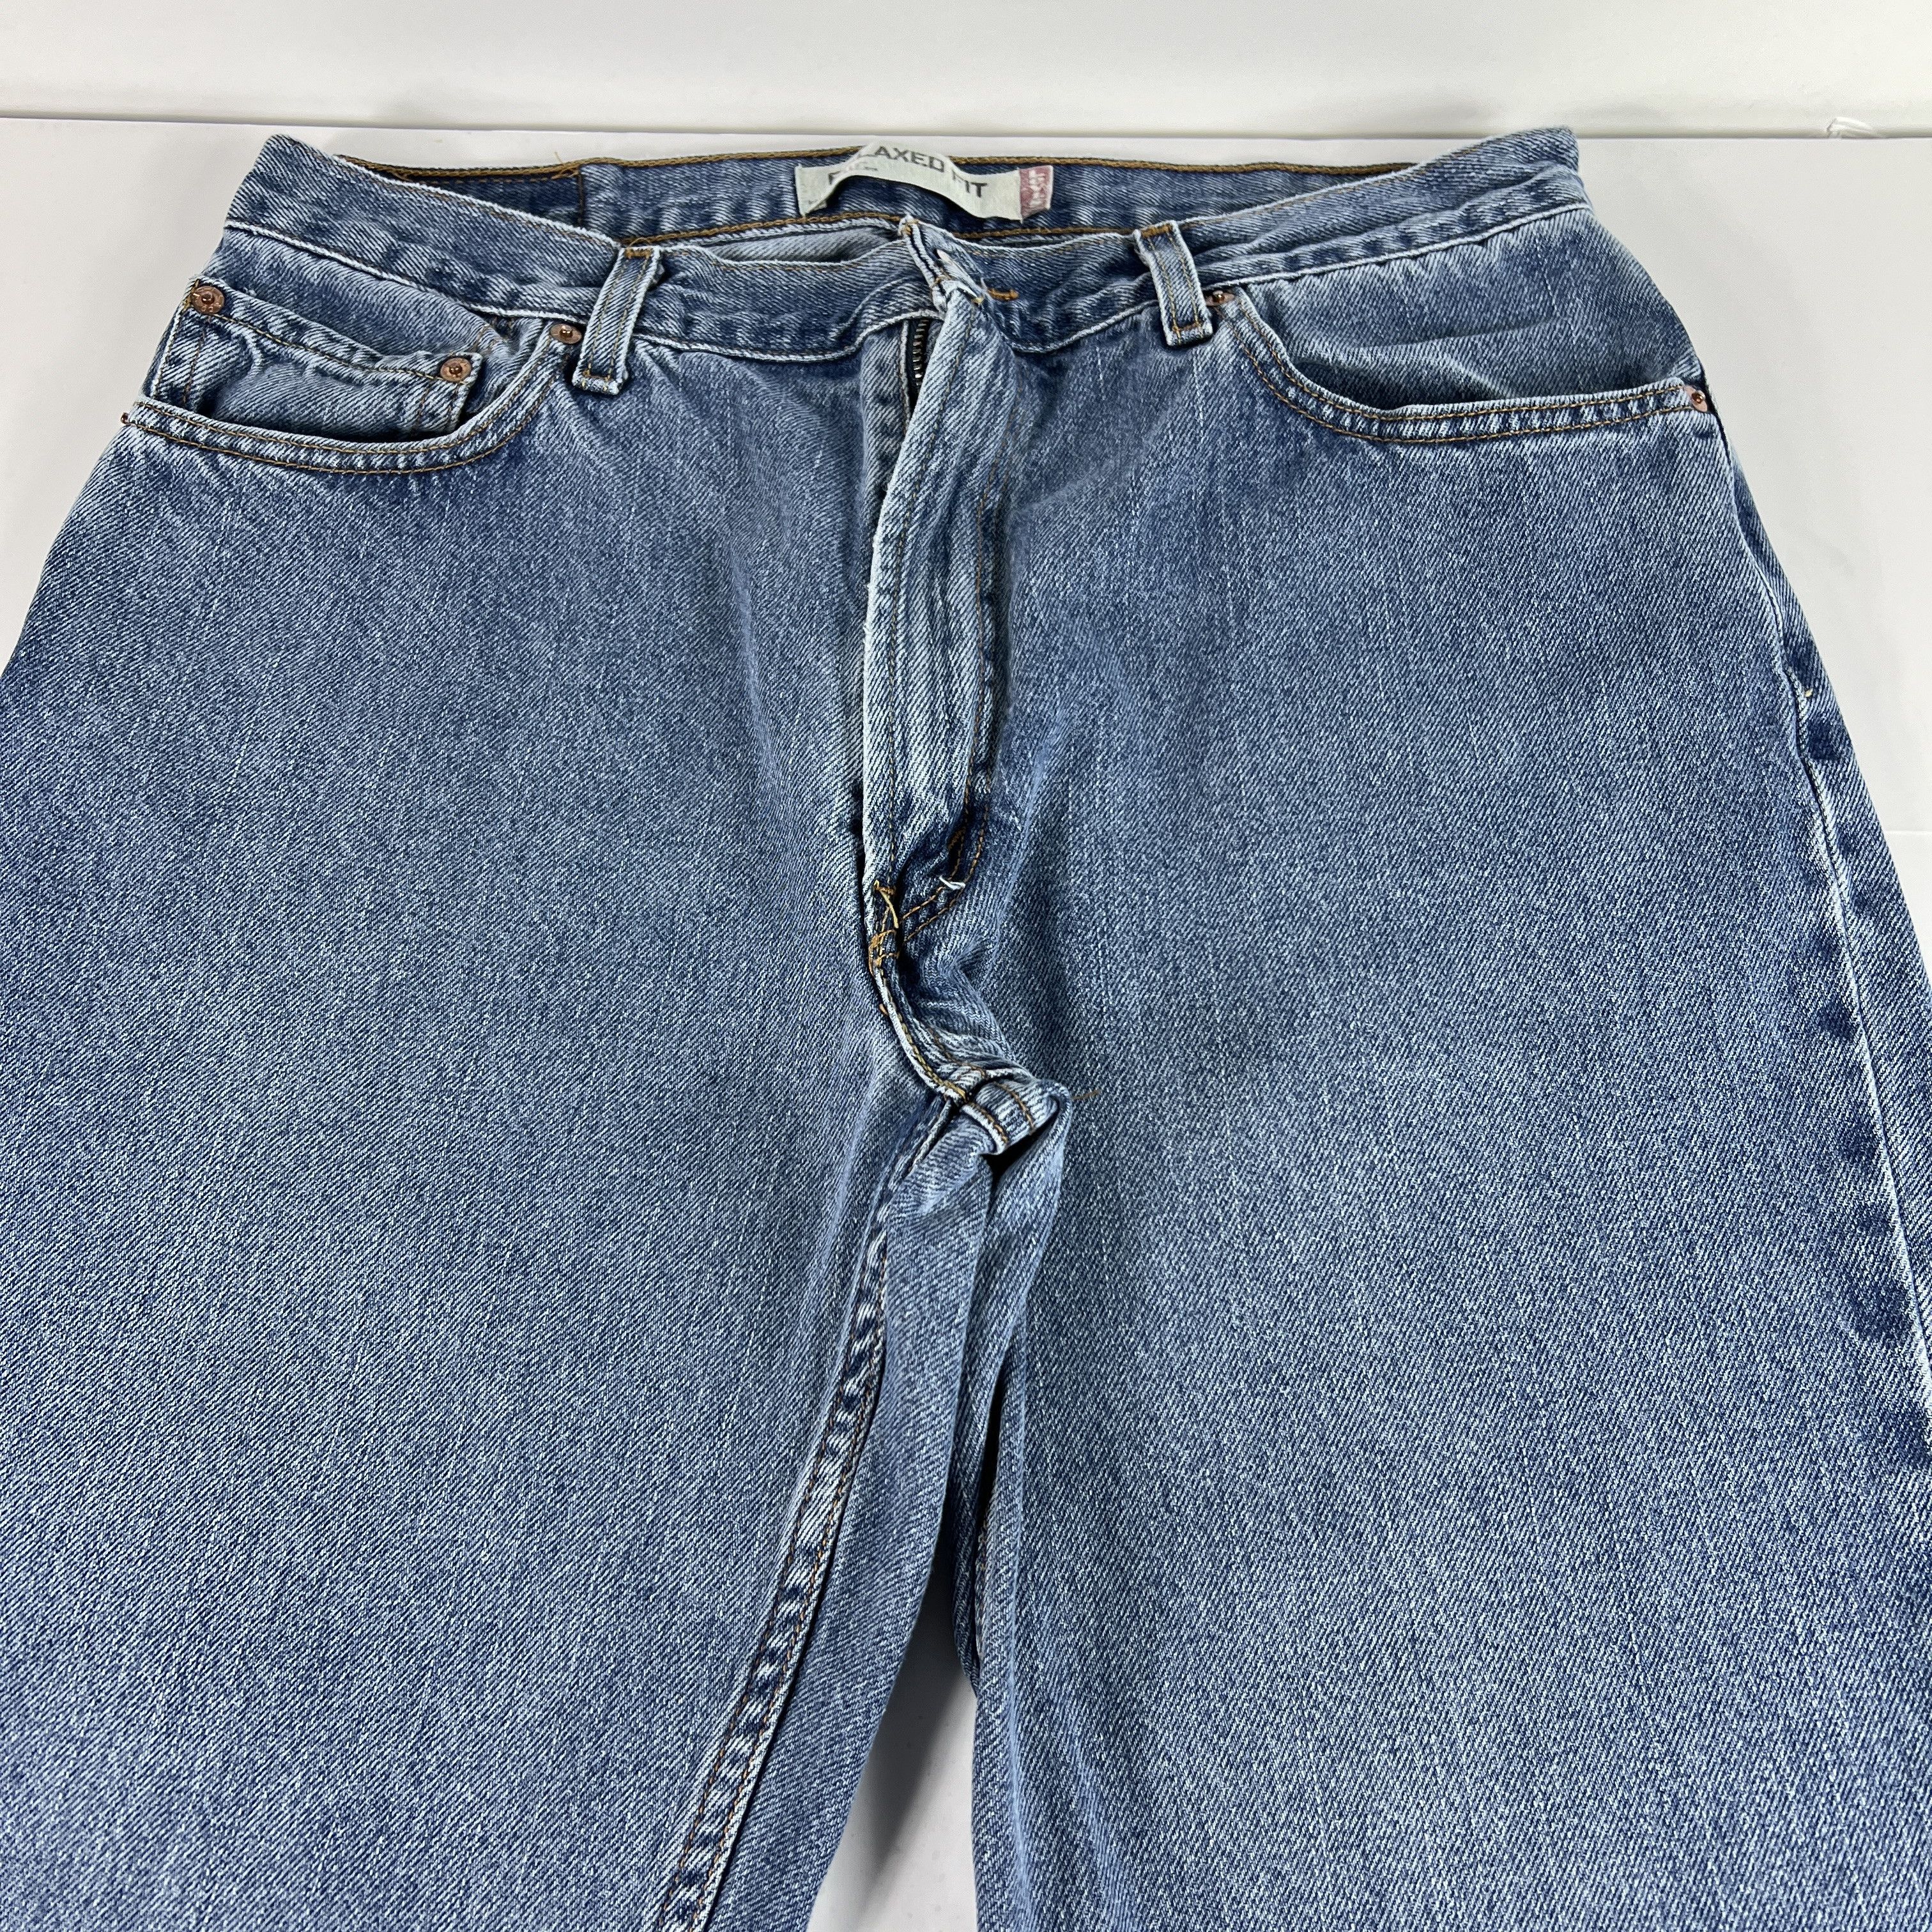 Levi's Y2K Levi's Jean 550 Relaxed Straight Blue Faded Cotton Denim Size US 34 / EU 50 - 2 Preview